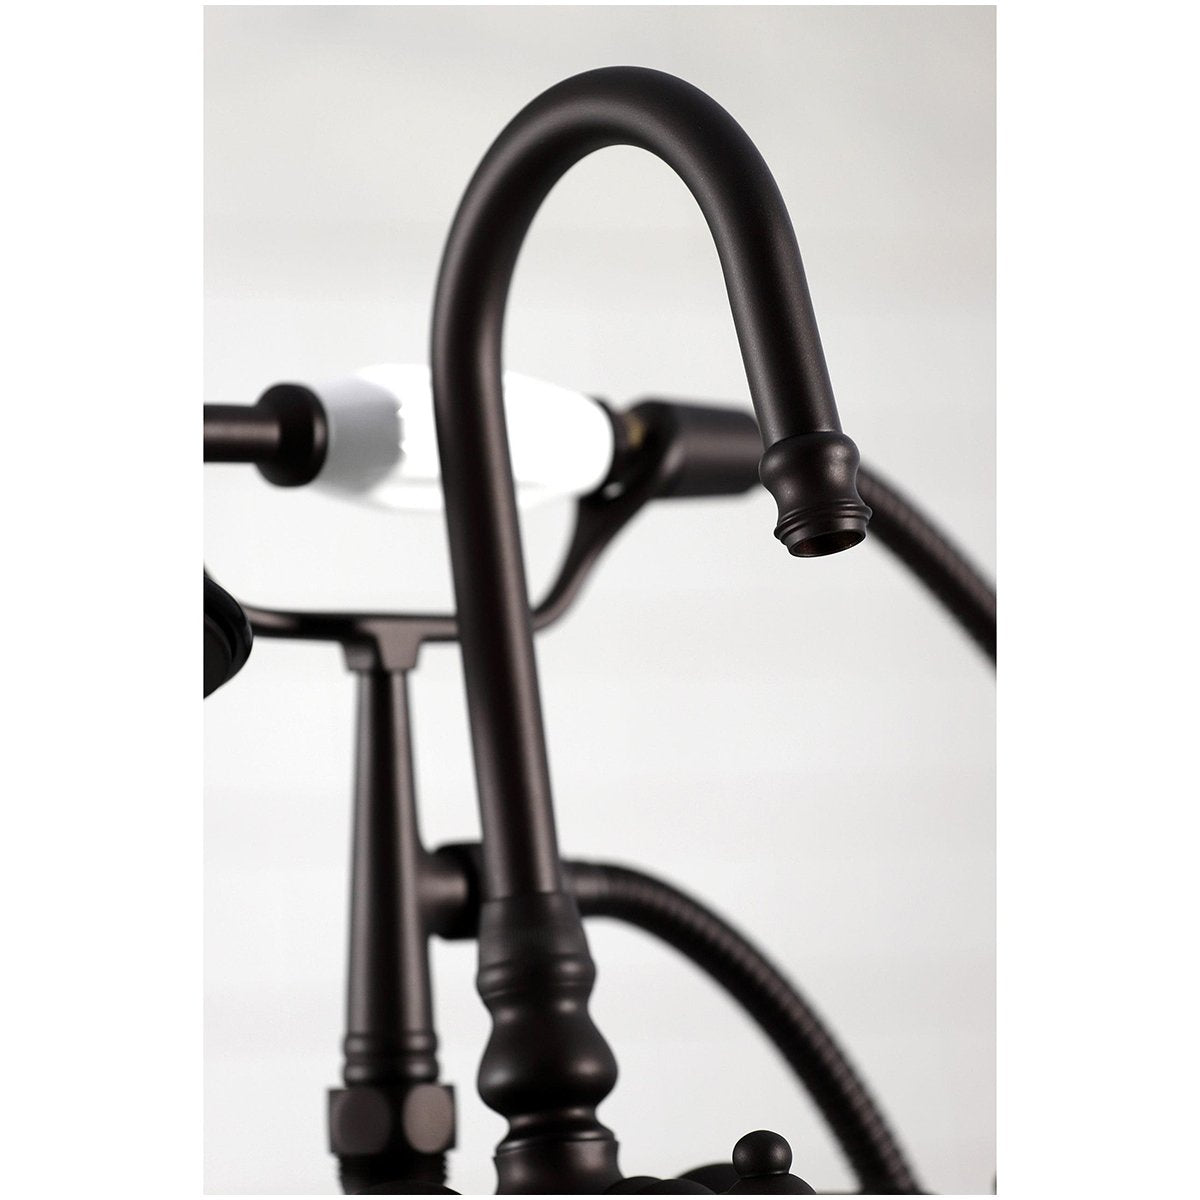 Kingston Brass CC617TX-P Vintage Clawfoot  12.5" x 10" x 8.25" Tub Faucet with Hand Shower